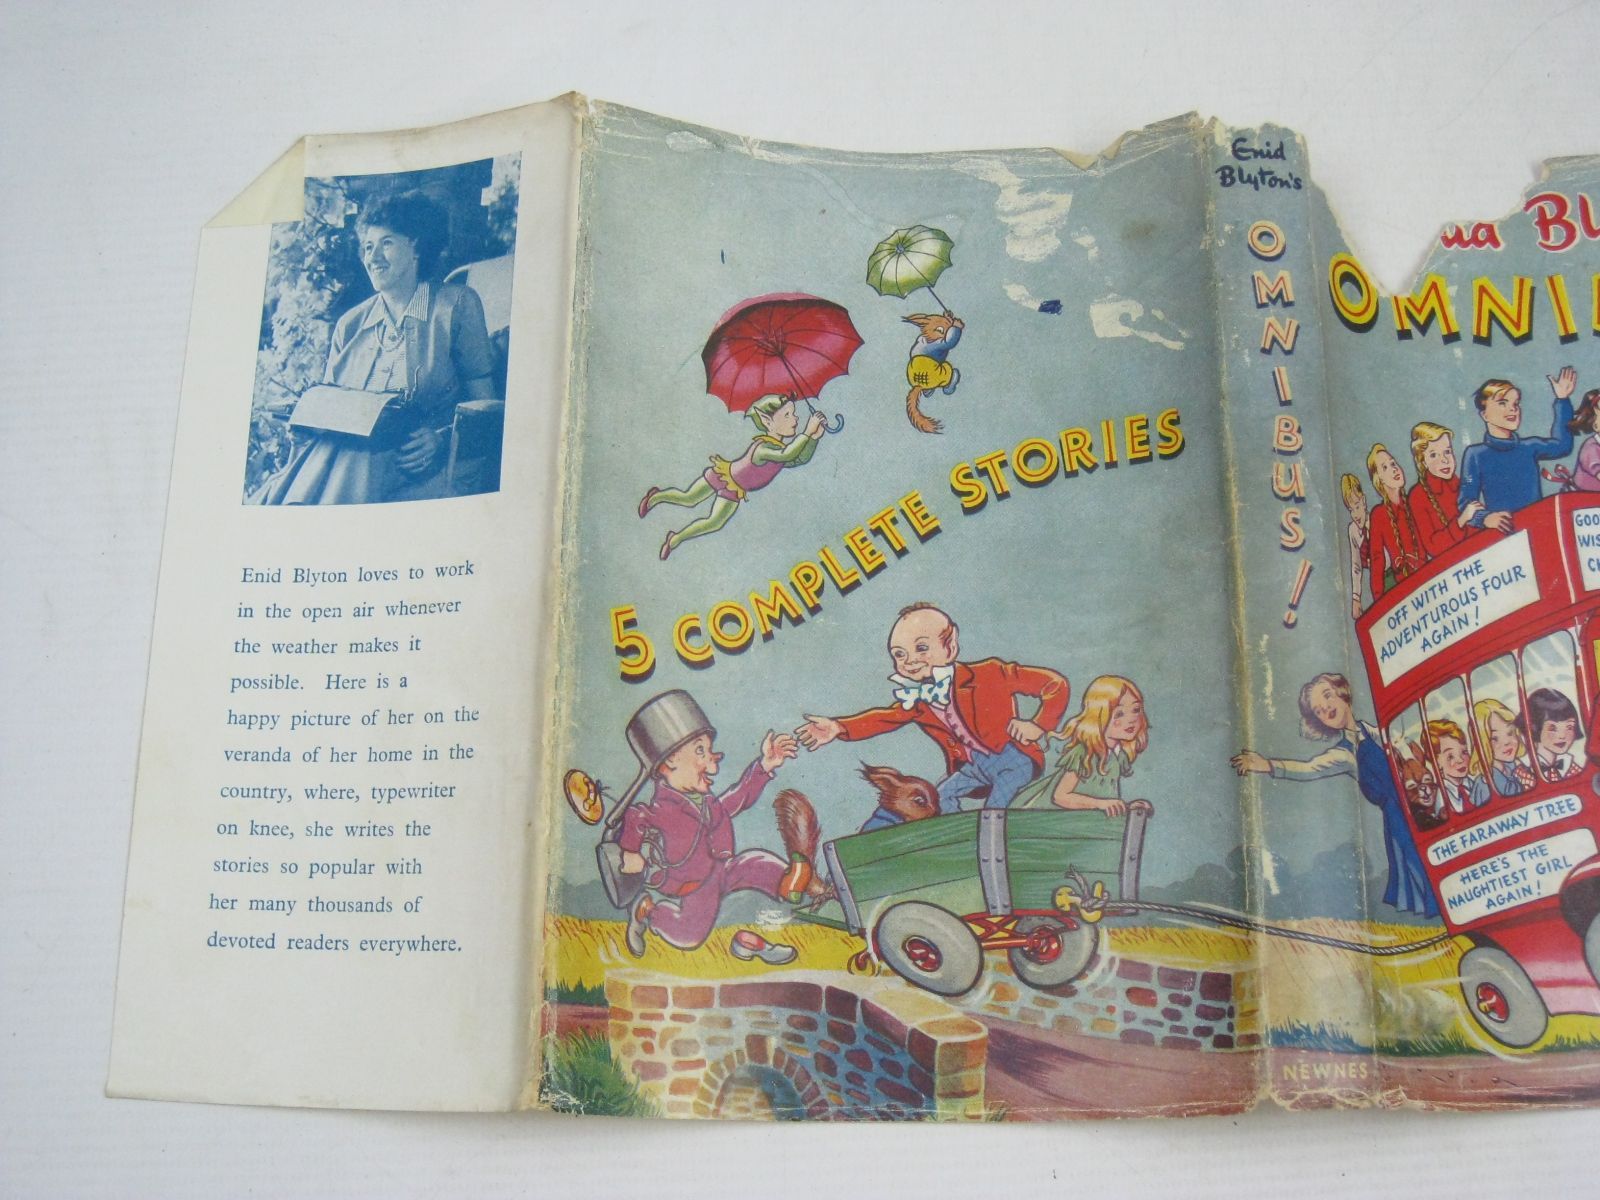 Photo of ENID BLYTON'S OMNIBUS written by Blyton, Enid illustrated by Land, Jessie
McGavin, Hilda
Davie, E.H.
Wheeler, Dorothy M.
Kay,  published by George Newnes Limited (STOCK CODE: 1405563)  for sale by Stella & Rose's Books